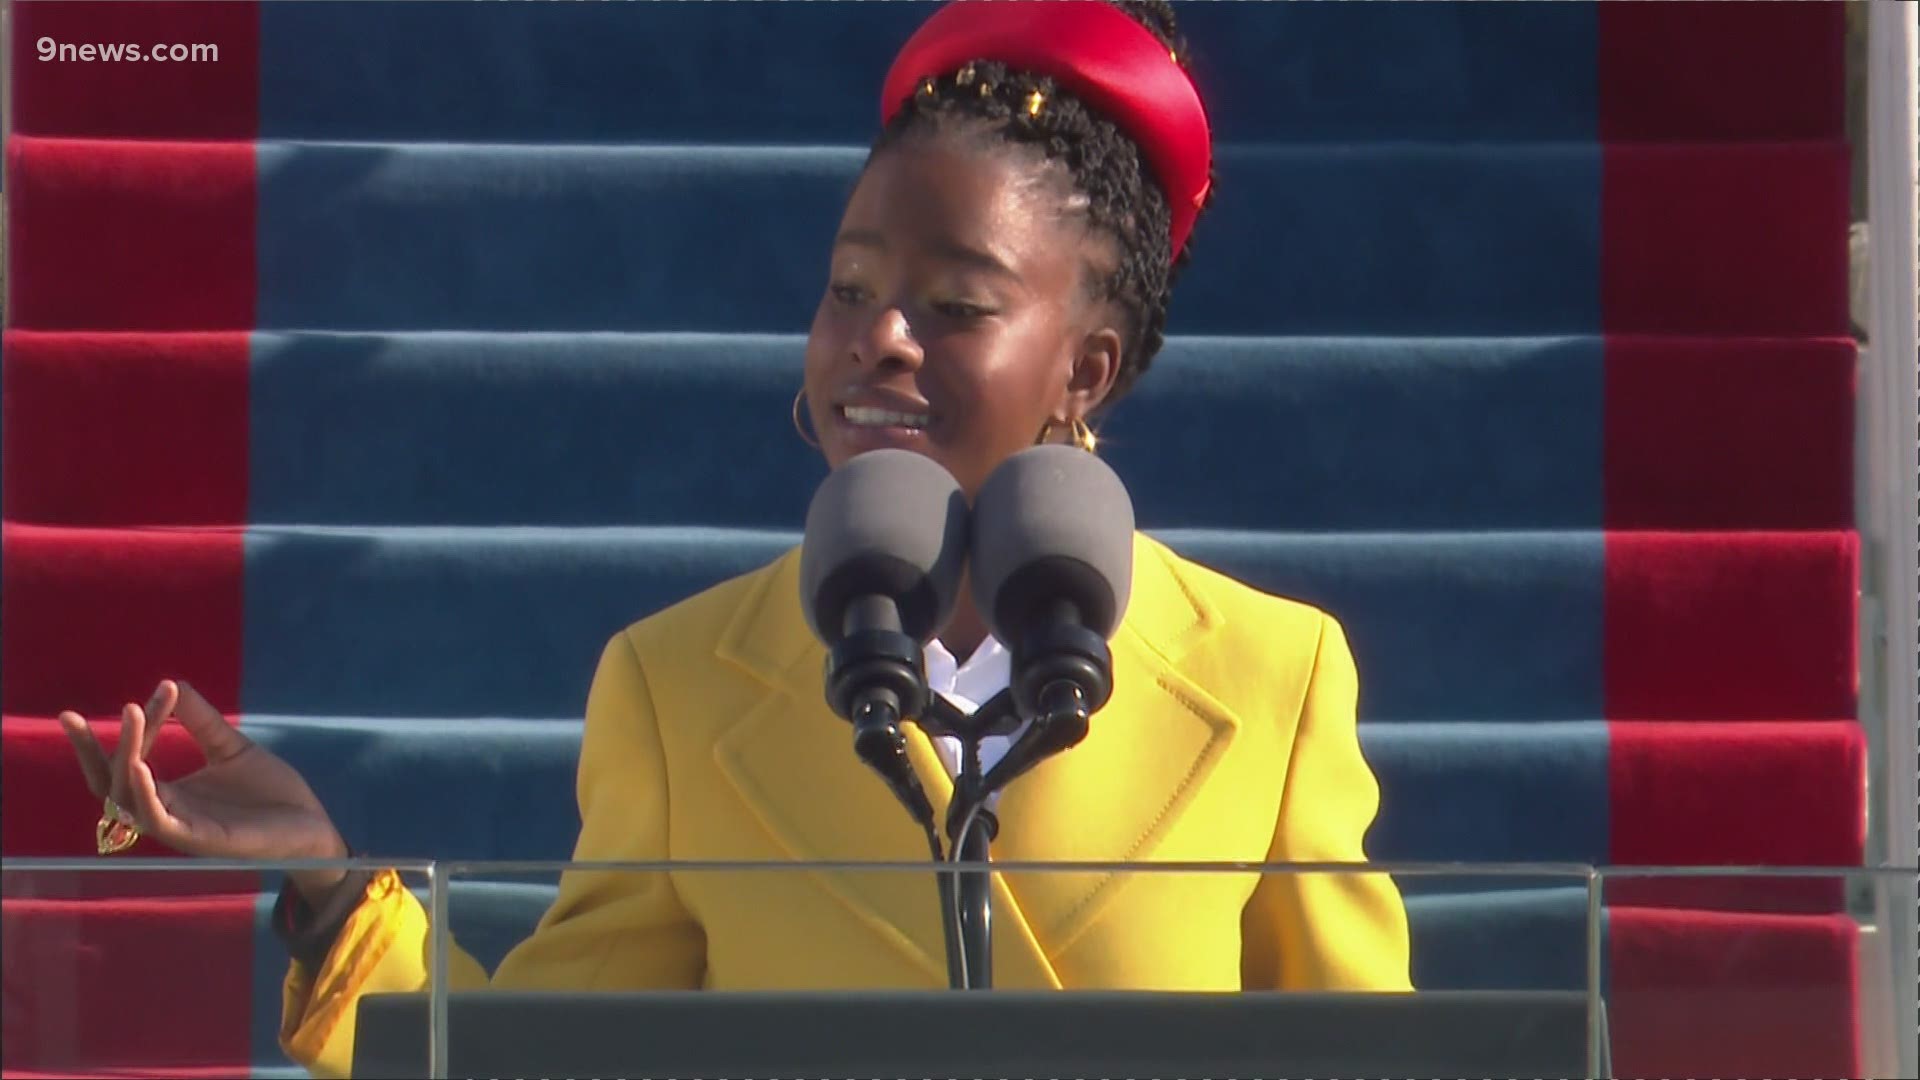 Amanda Gorman, 22, is the first National Youth Poet Laureate and the youngest person to recite a poem at an inauguration.